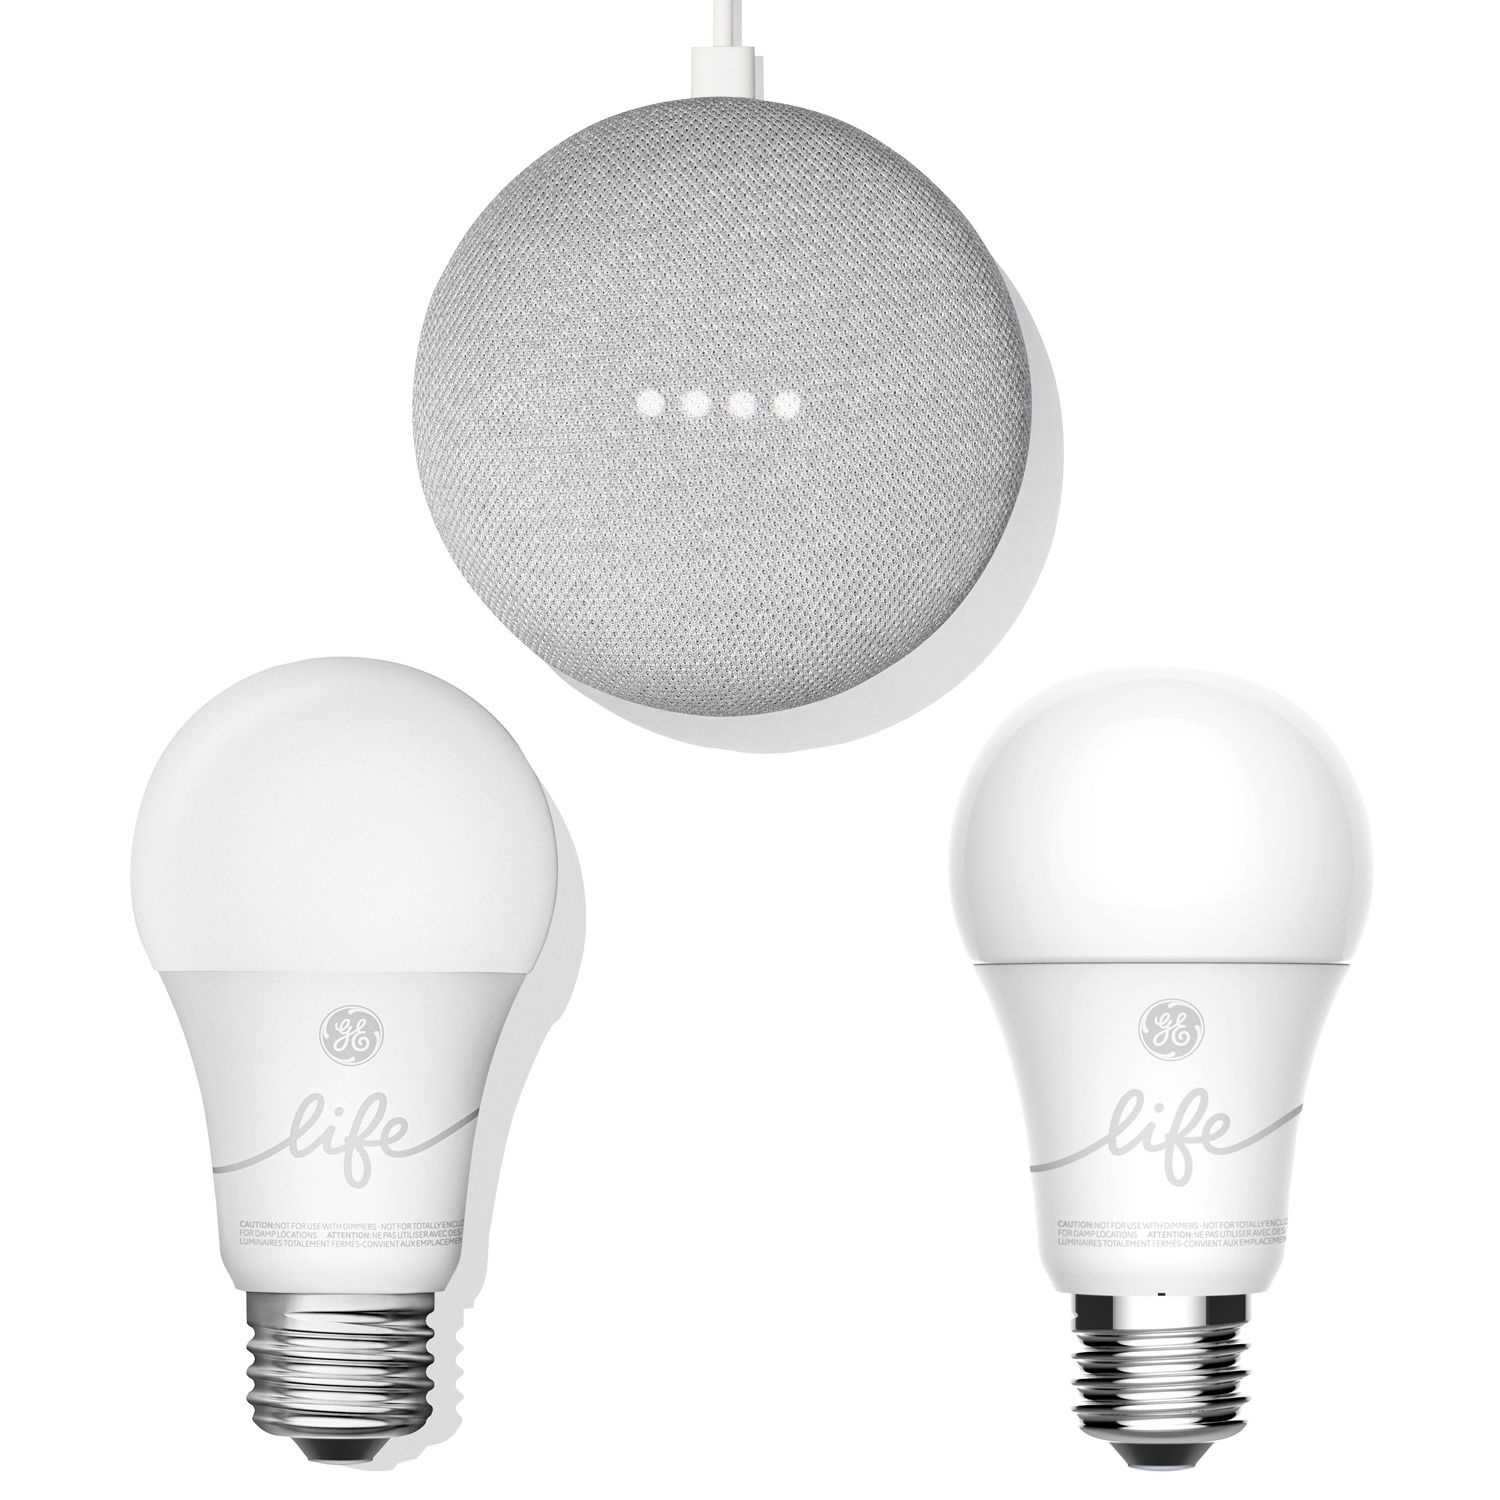 smart light that works with google home